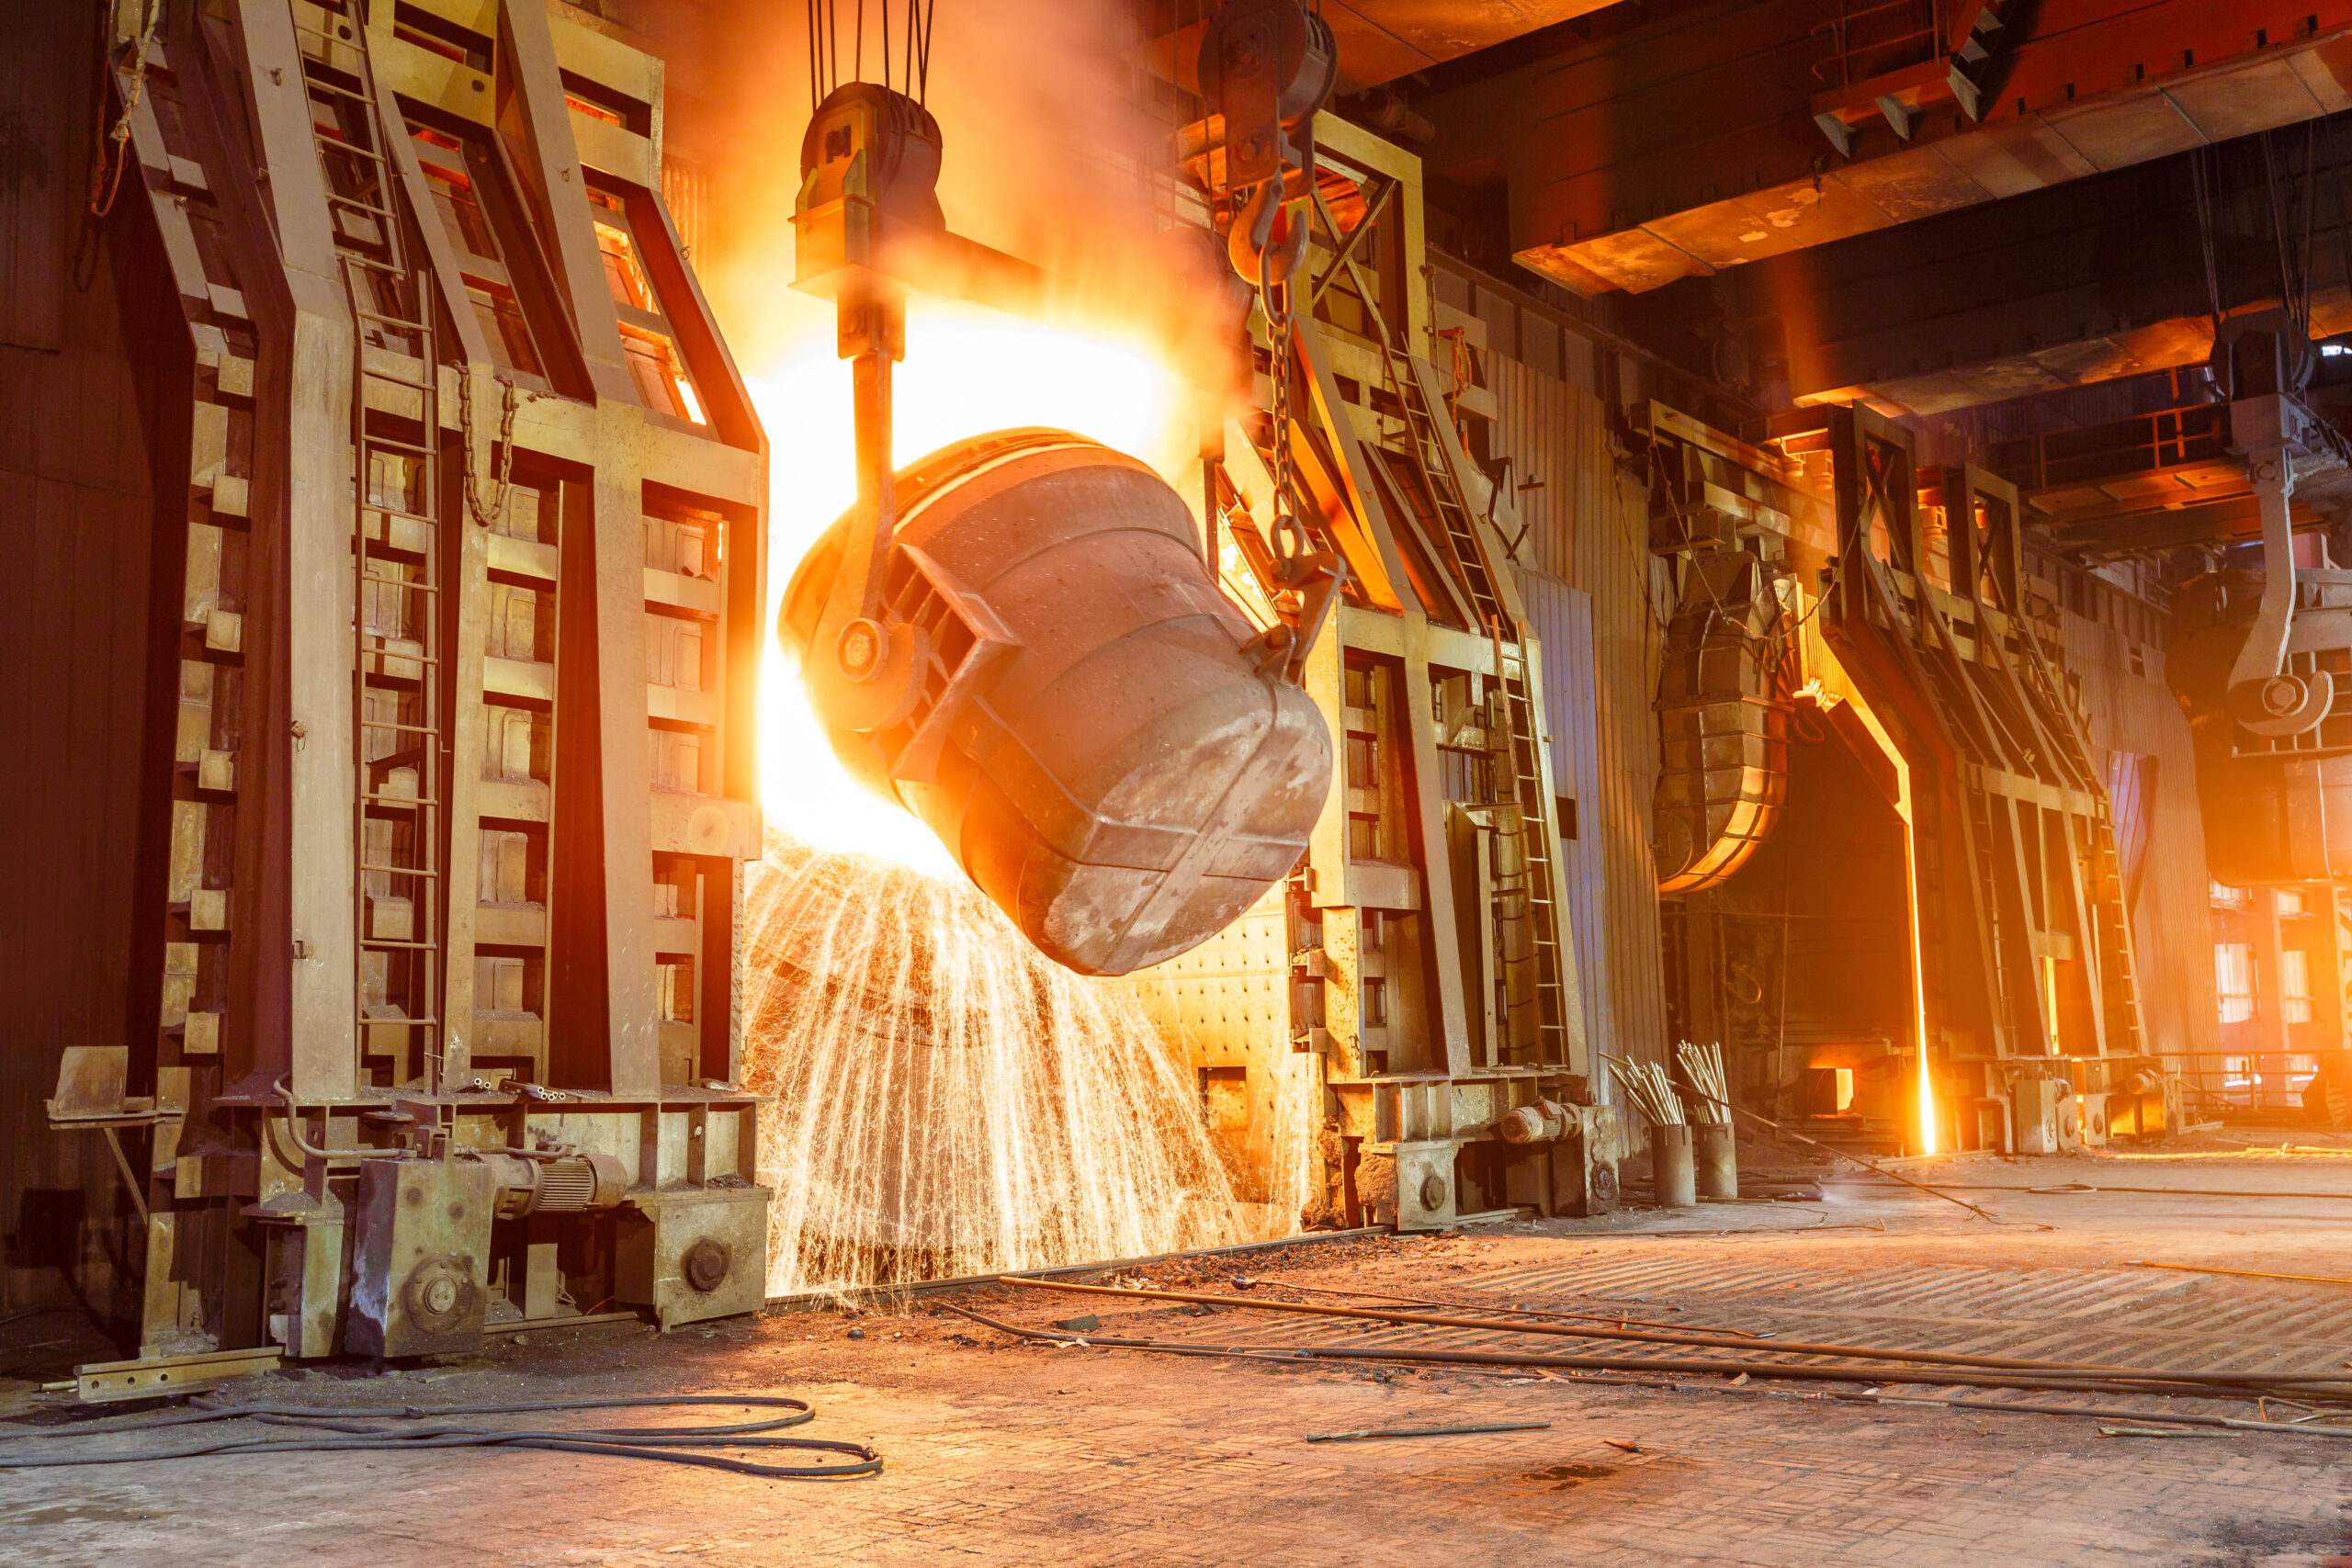 Simulation Takes the Heat off Tata Steel During Production